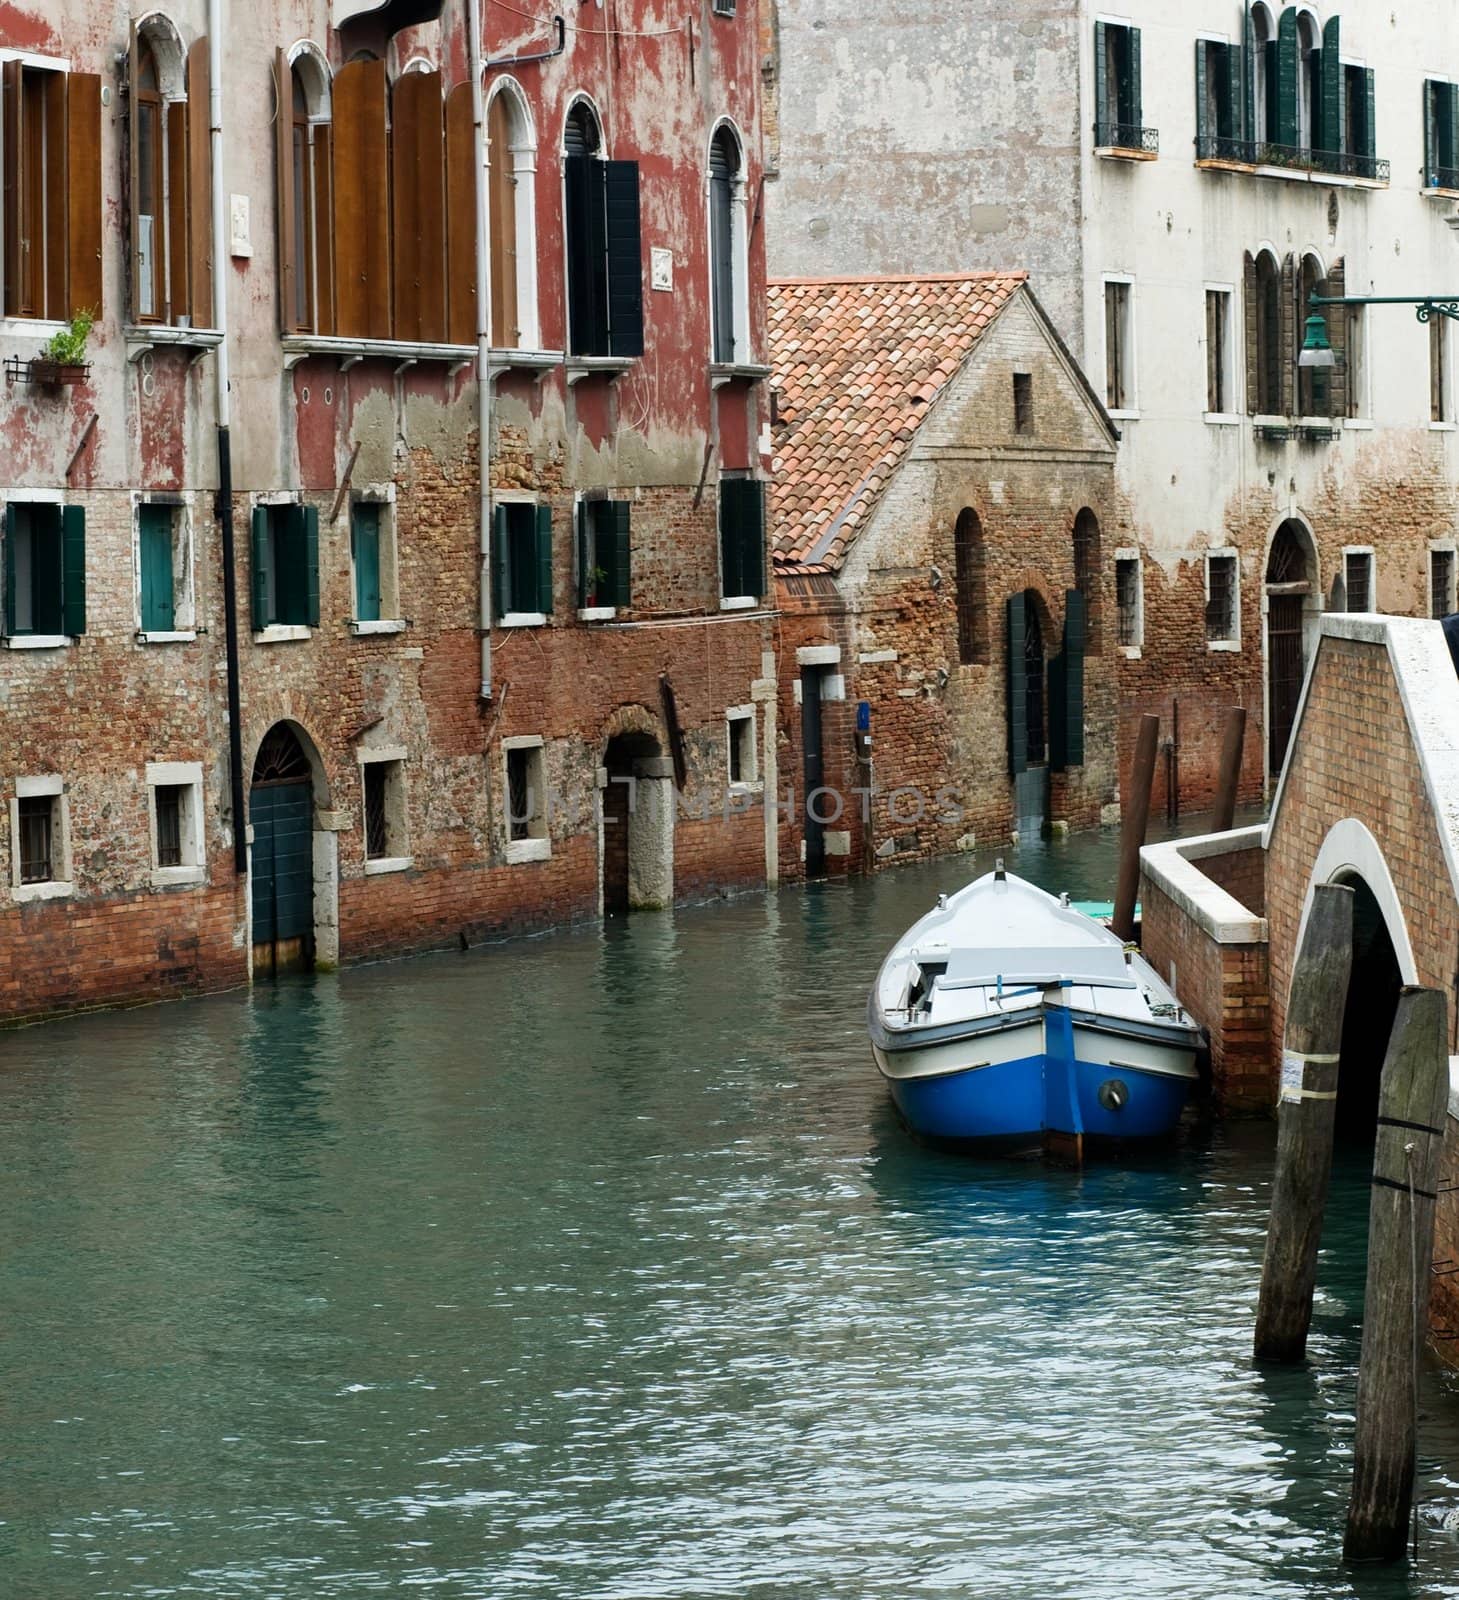 An image of a canal with boat in Venice